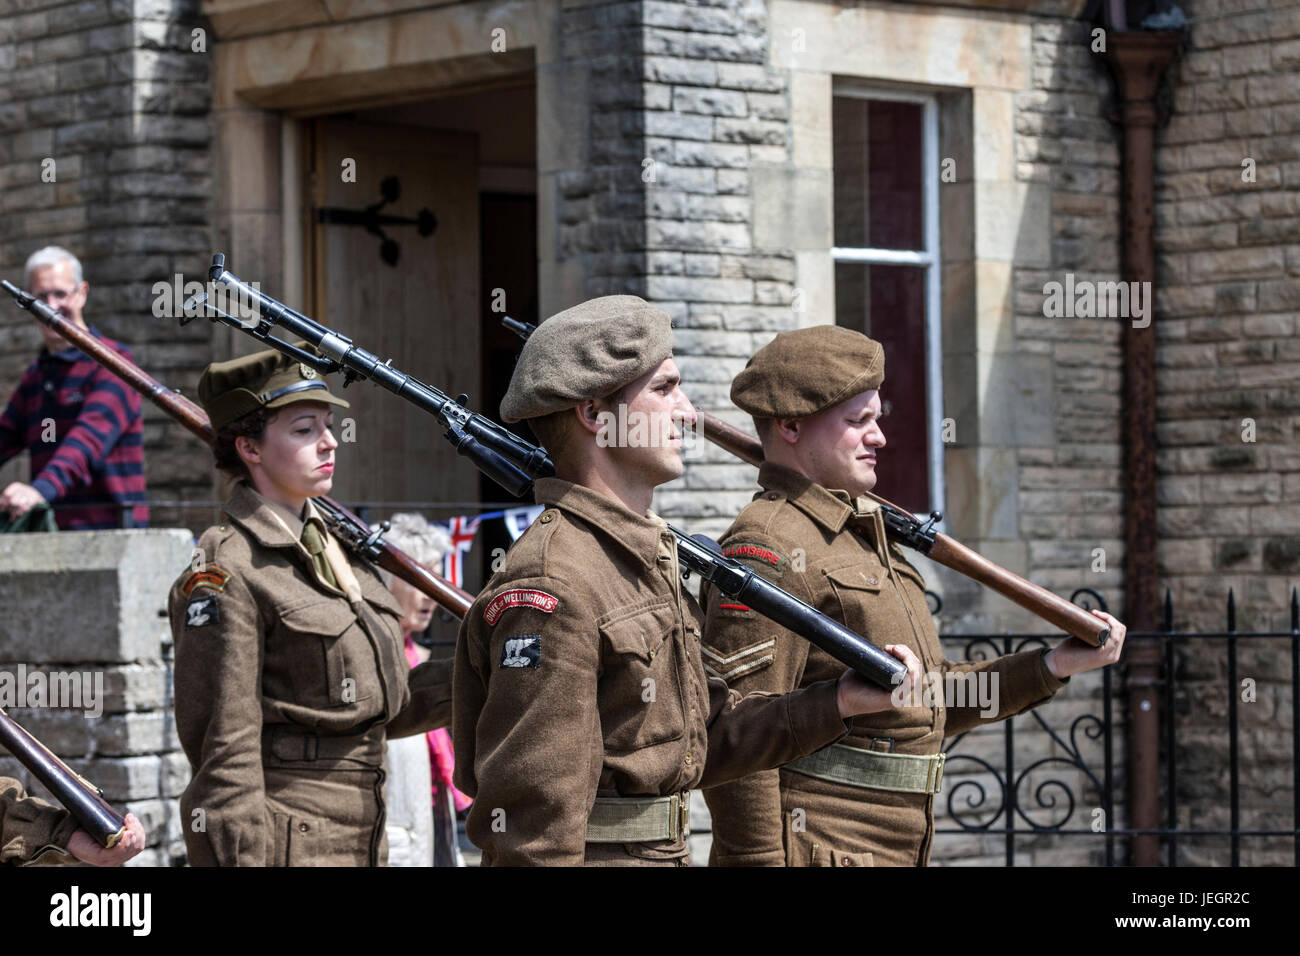 Barnard Castle, Teesdale, County Durham UK. Sunday 25th June 2017. The Northeast Market town of Barnard Castle took a step back in time today as people dressed up in 1940's clothes and uniforms as part of and the Barnard Castle 1940's Weekend celebrations. This also included a wreath laying ceremony to remember those who lost their lives in conflicts around the world. Credit: David Forster/Alamy Live News Stock Photo